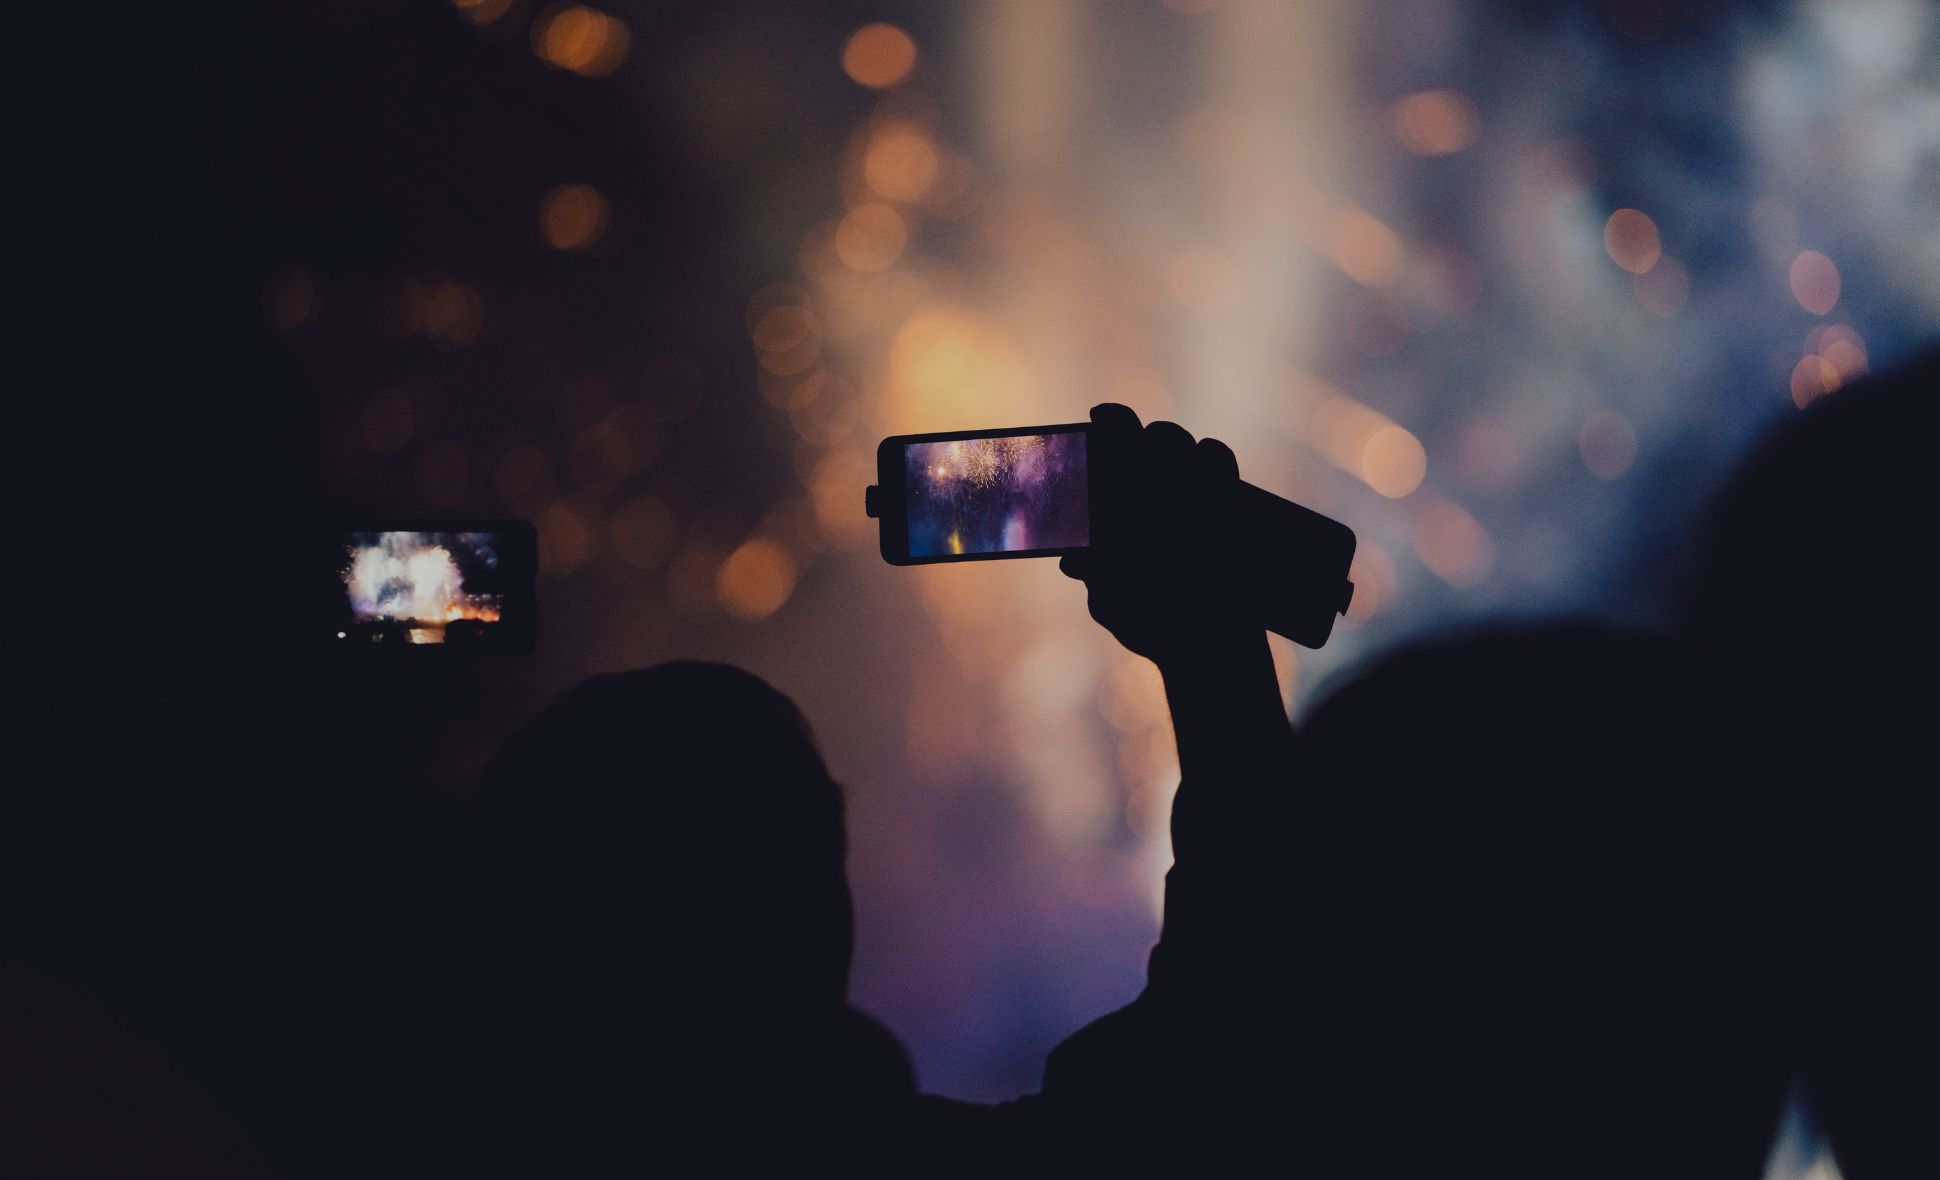 An image of a person videoing an event using a camera on a phone.